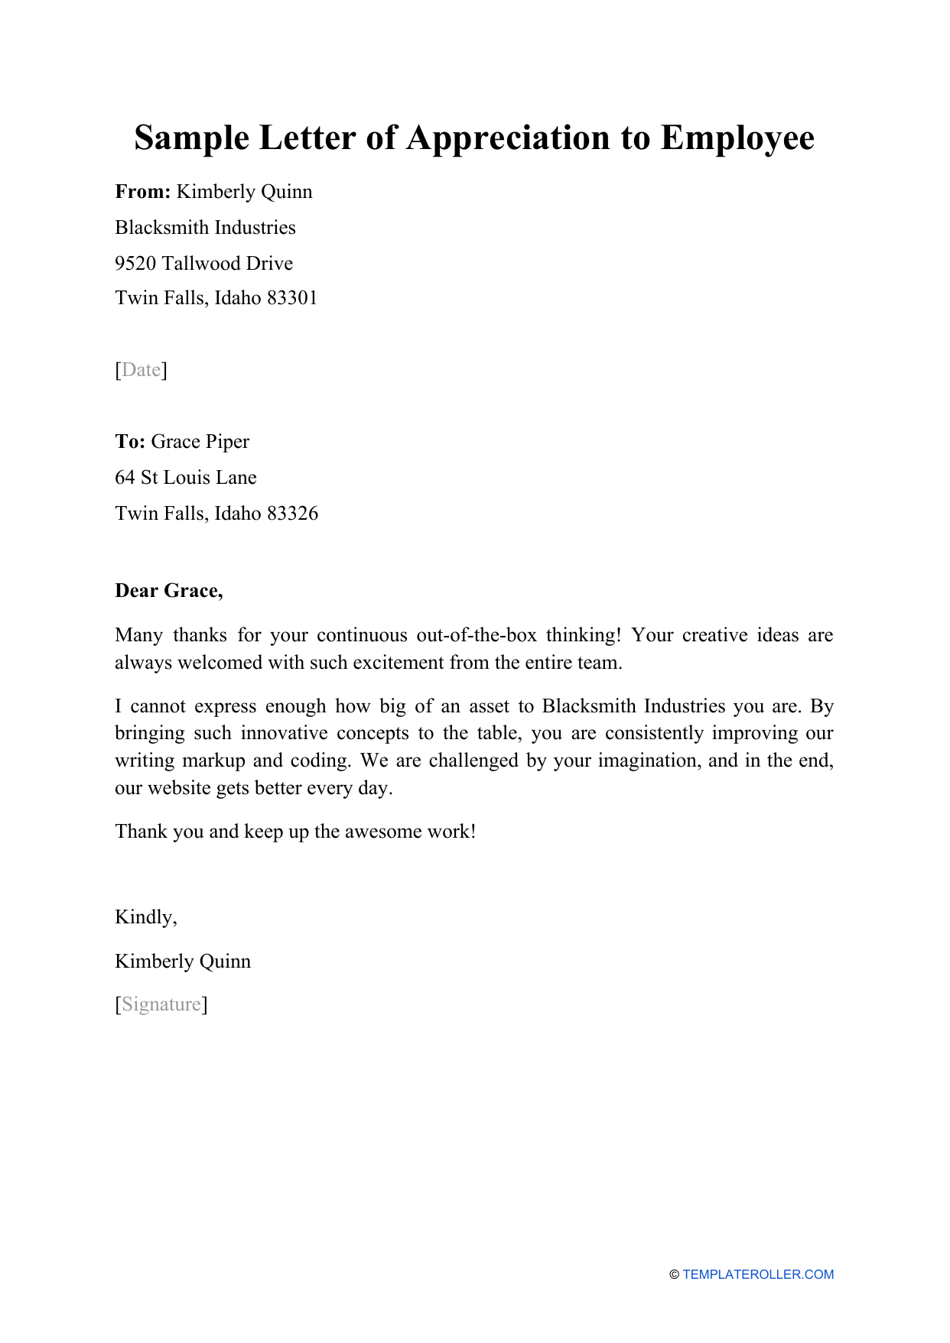 Sample Letter of Appreciation to Employee, Page 1